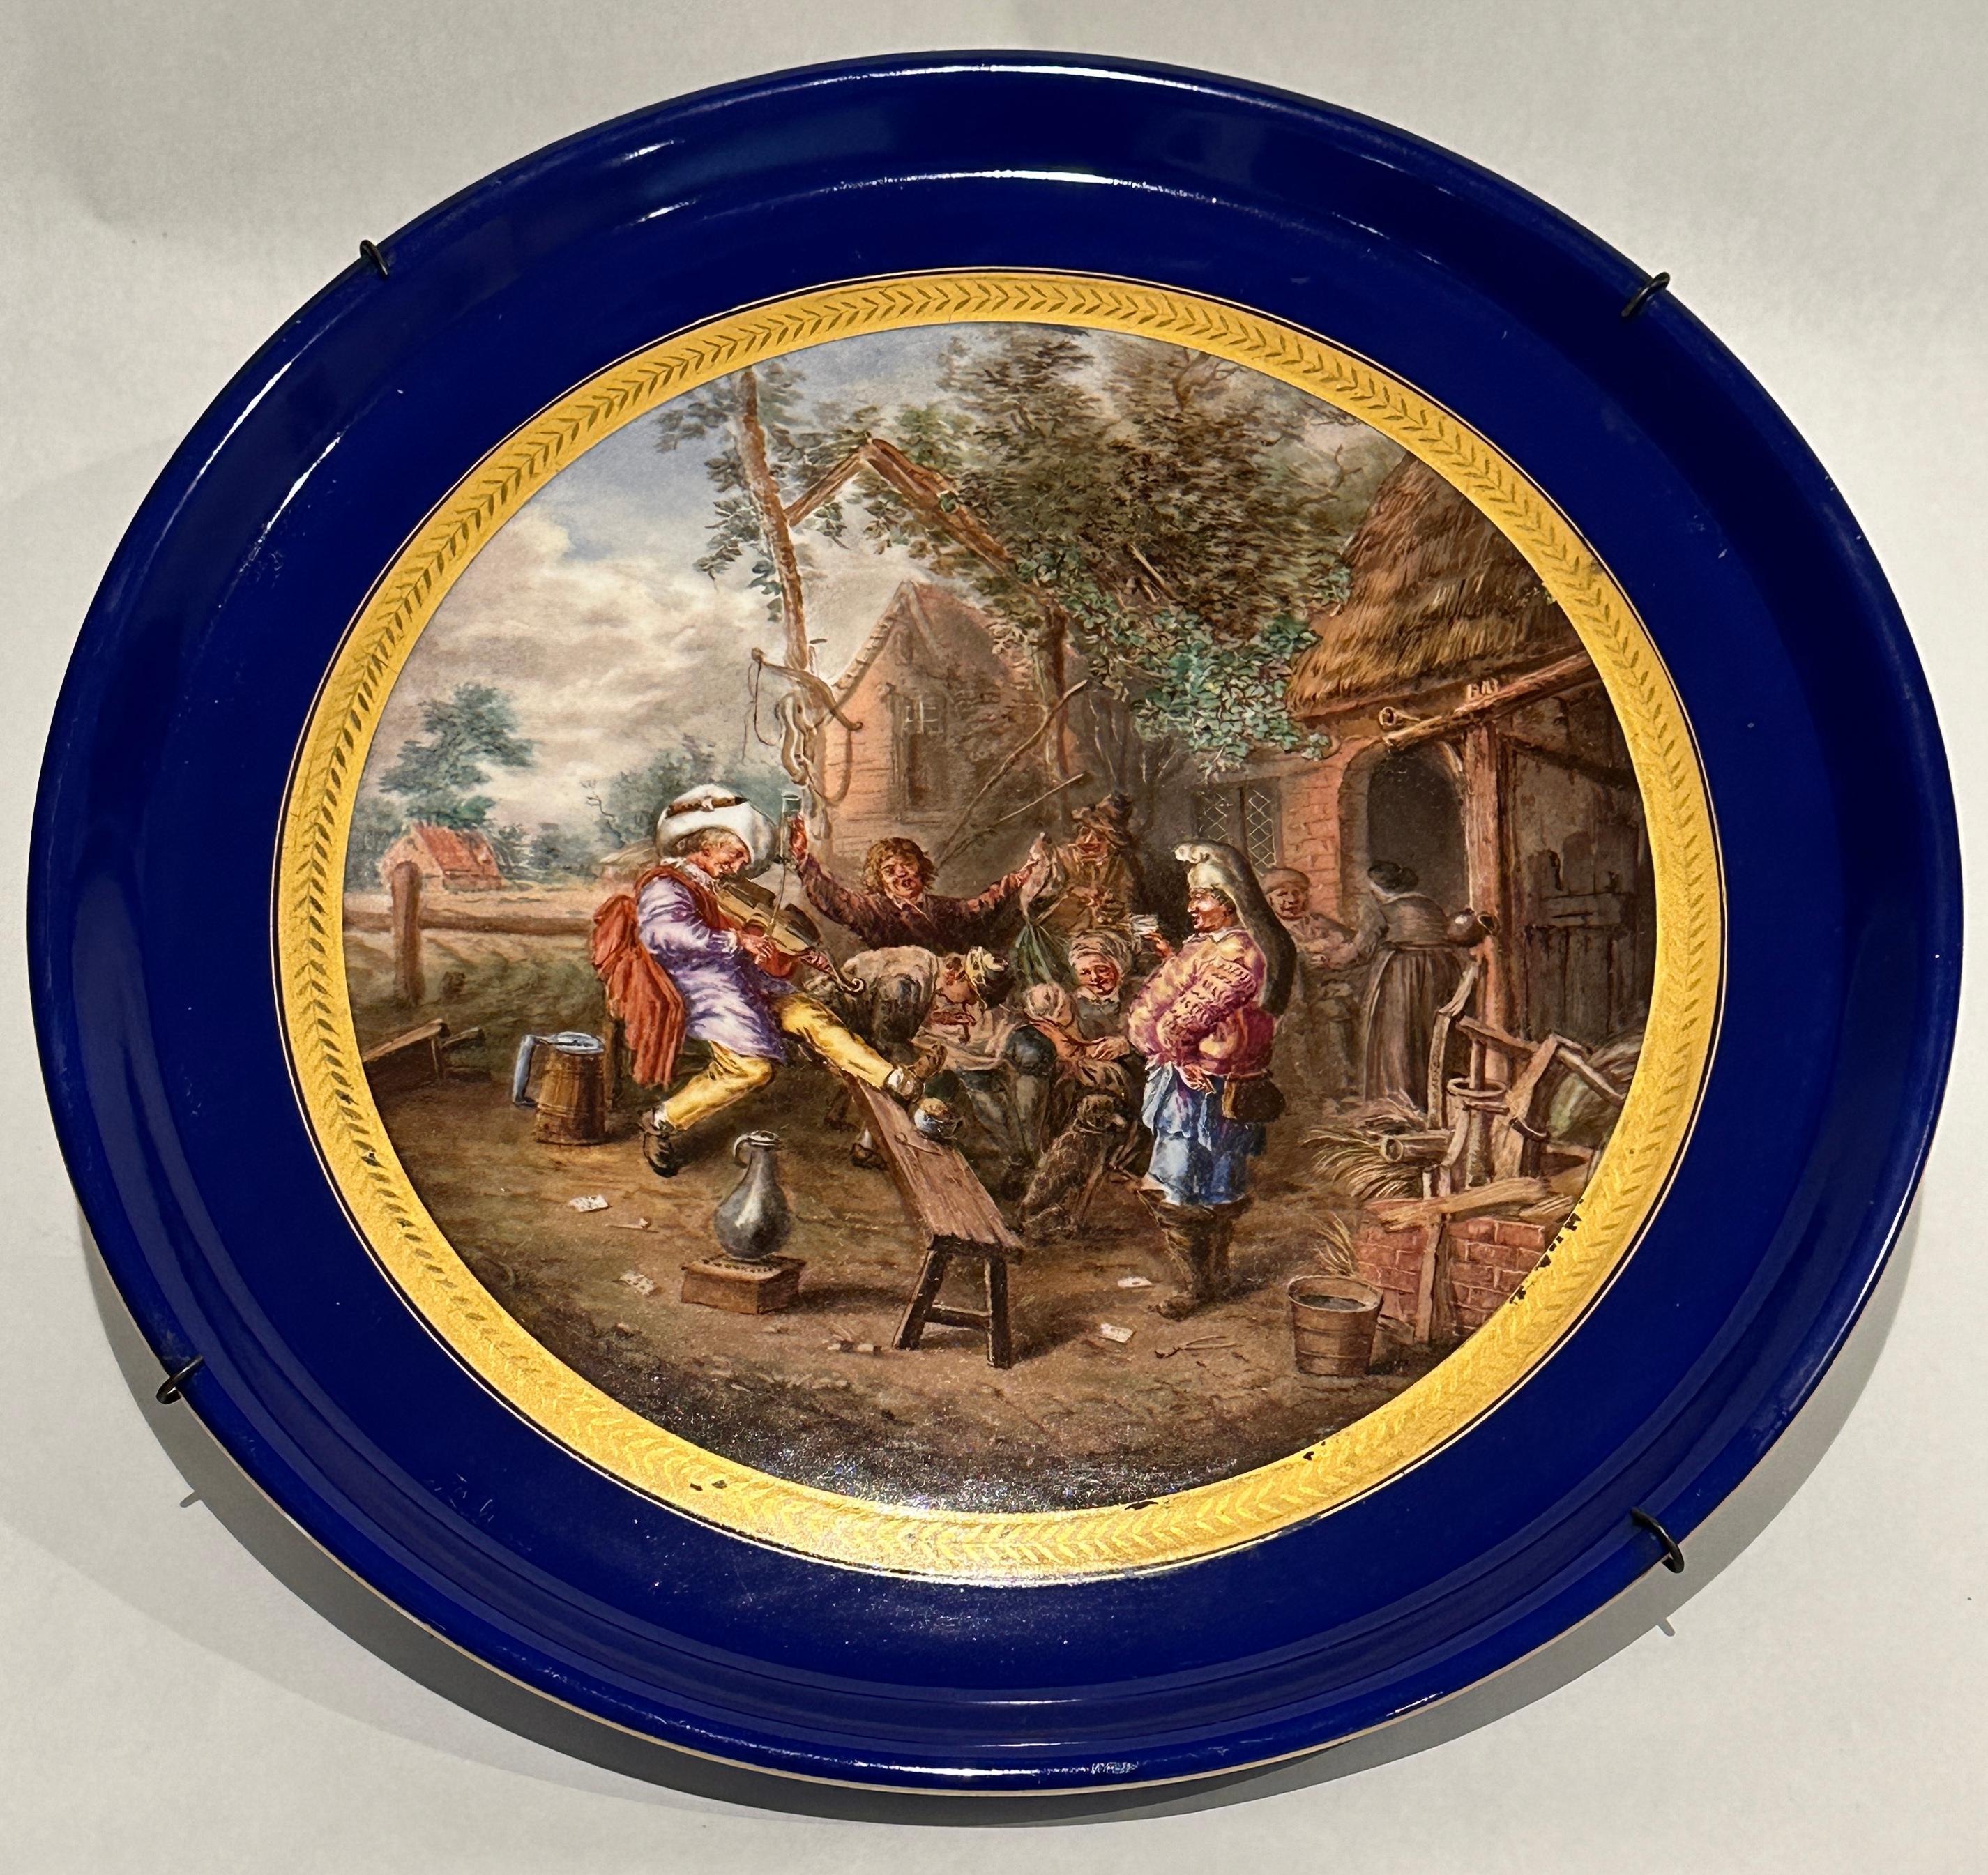 This large French porcelain charger, in the Sèvres style, is intricately painted with a period courtyard scene, set in the yard of a house with family gathering in celebration. Father figure playing a stringed instrument, in the presence of other